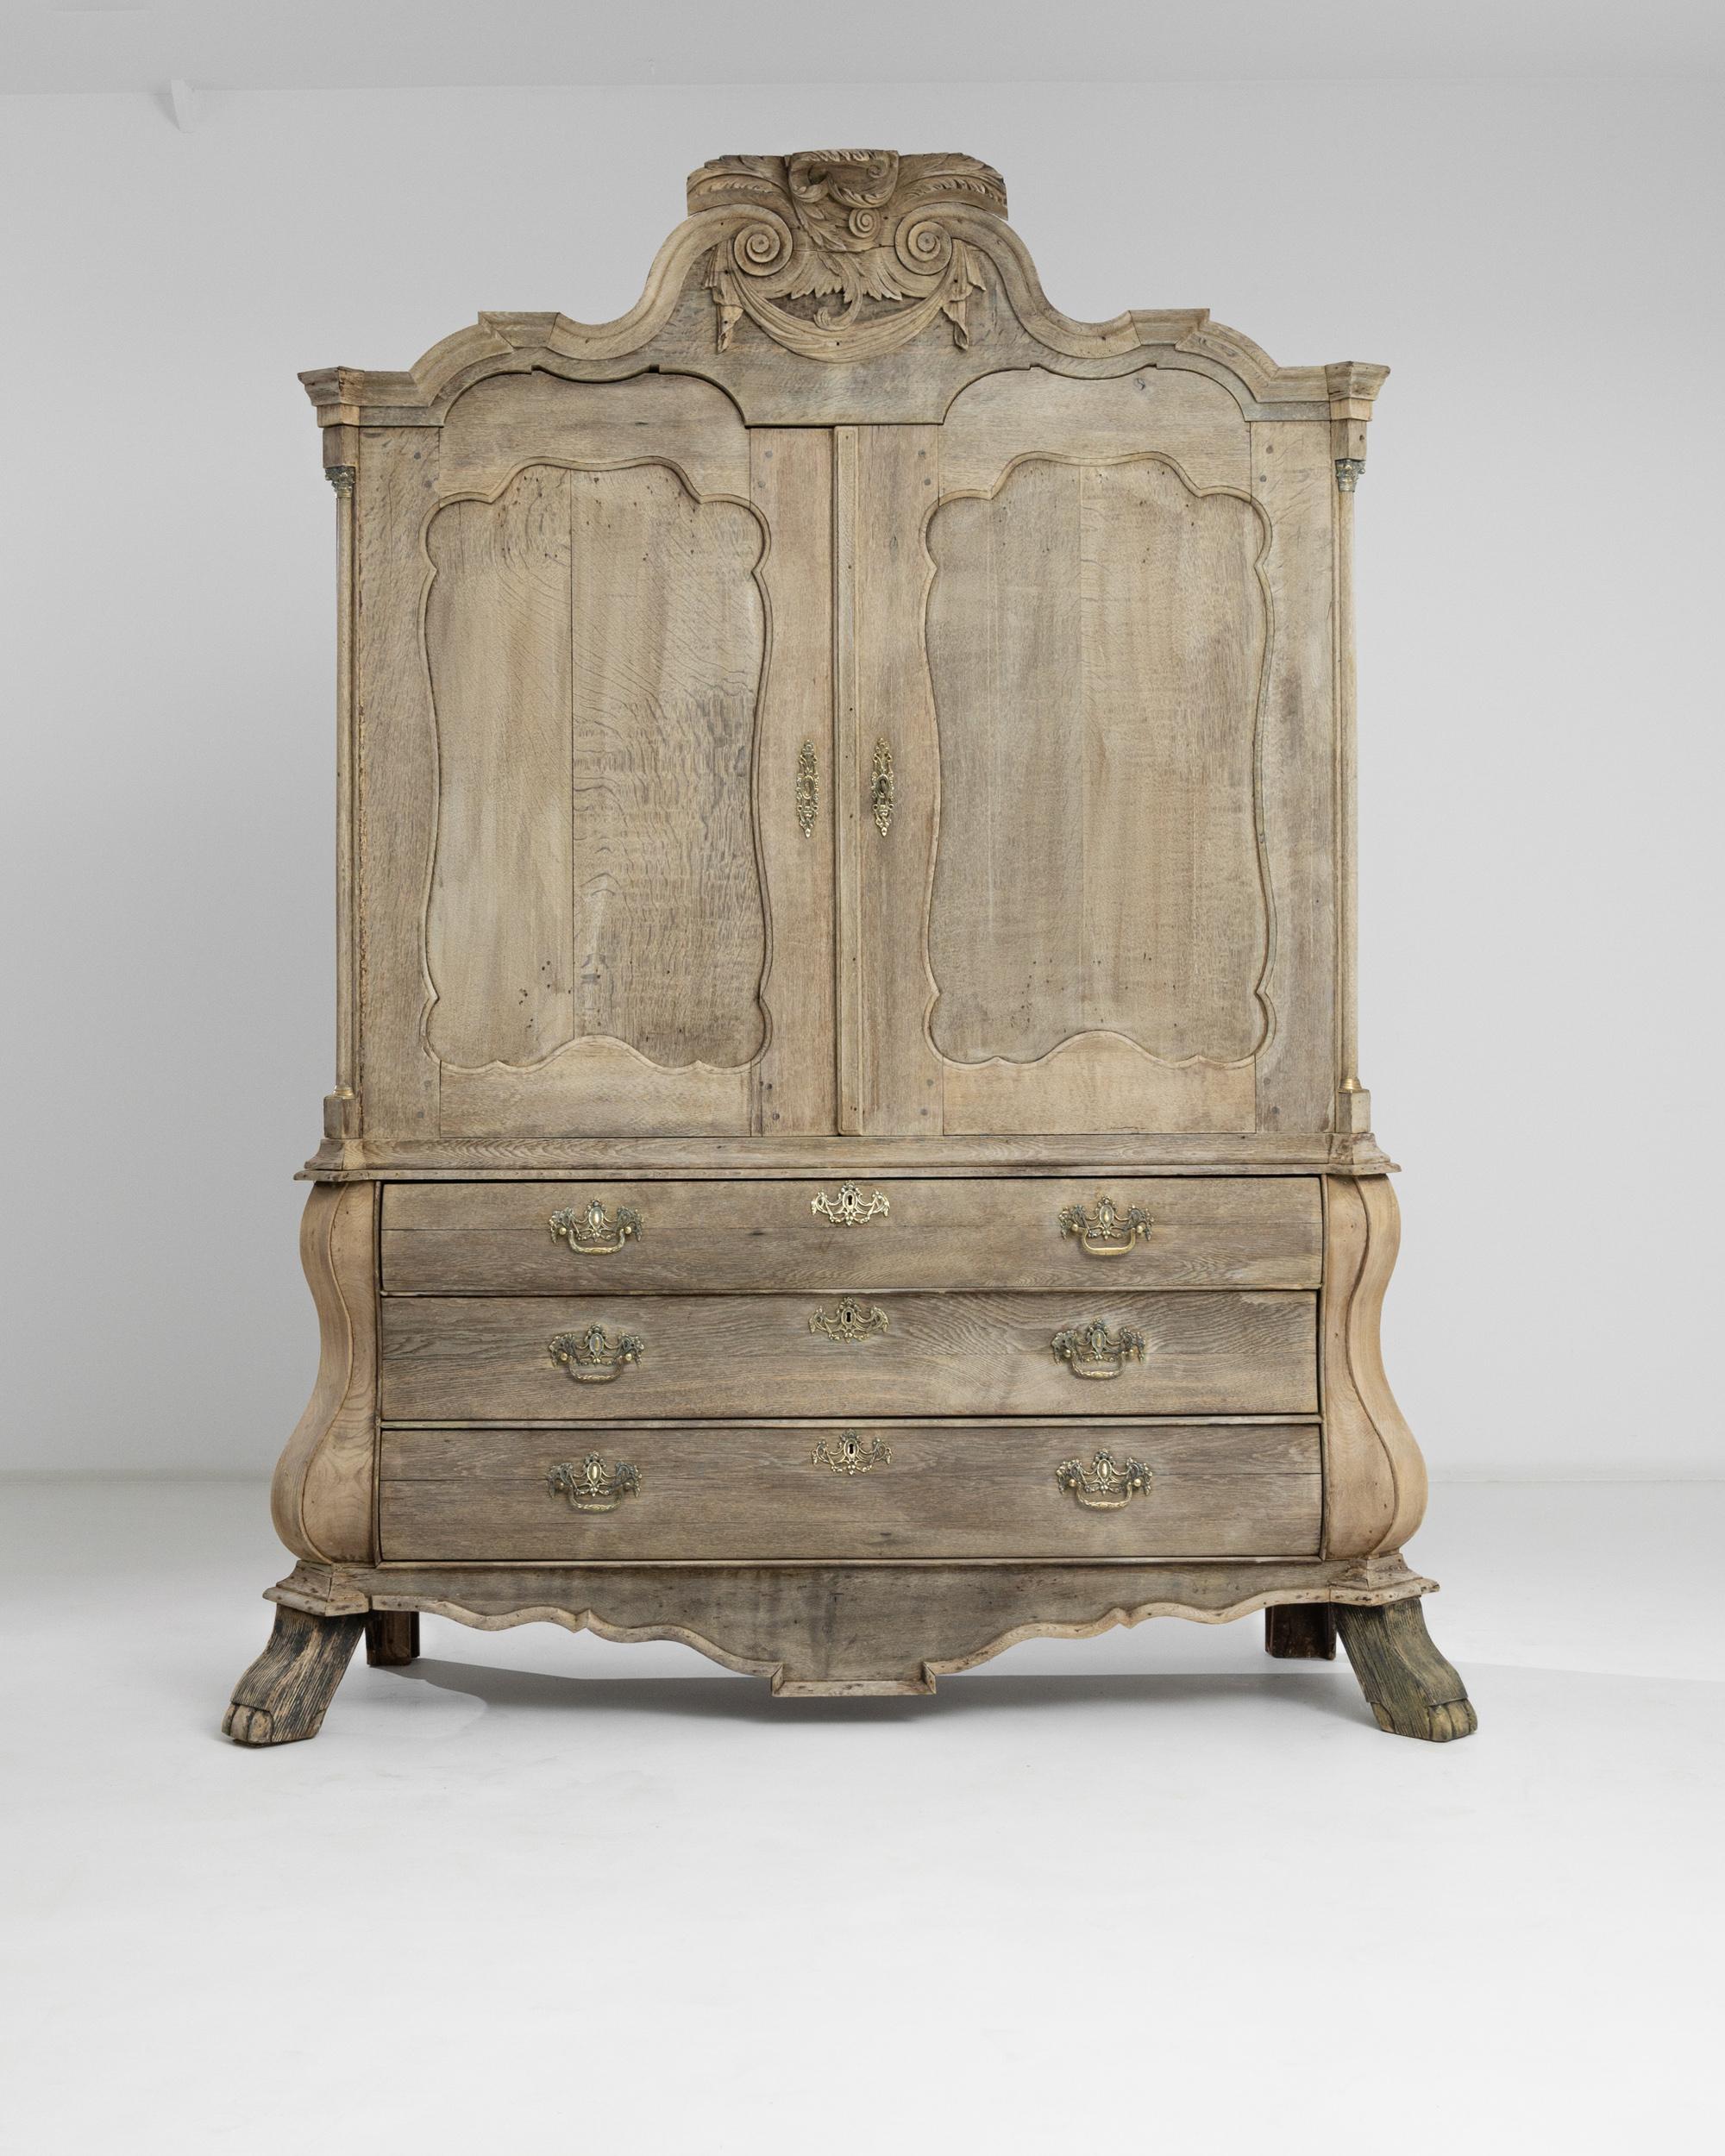 A rare antique cabinet produced in the Netherlands, circa 1800. An imposing carved chest stands on squared hoof feet, betraying a French influence. Flanked by discreet columns, the carved front doors are crowned by an ornate top with a lush central